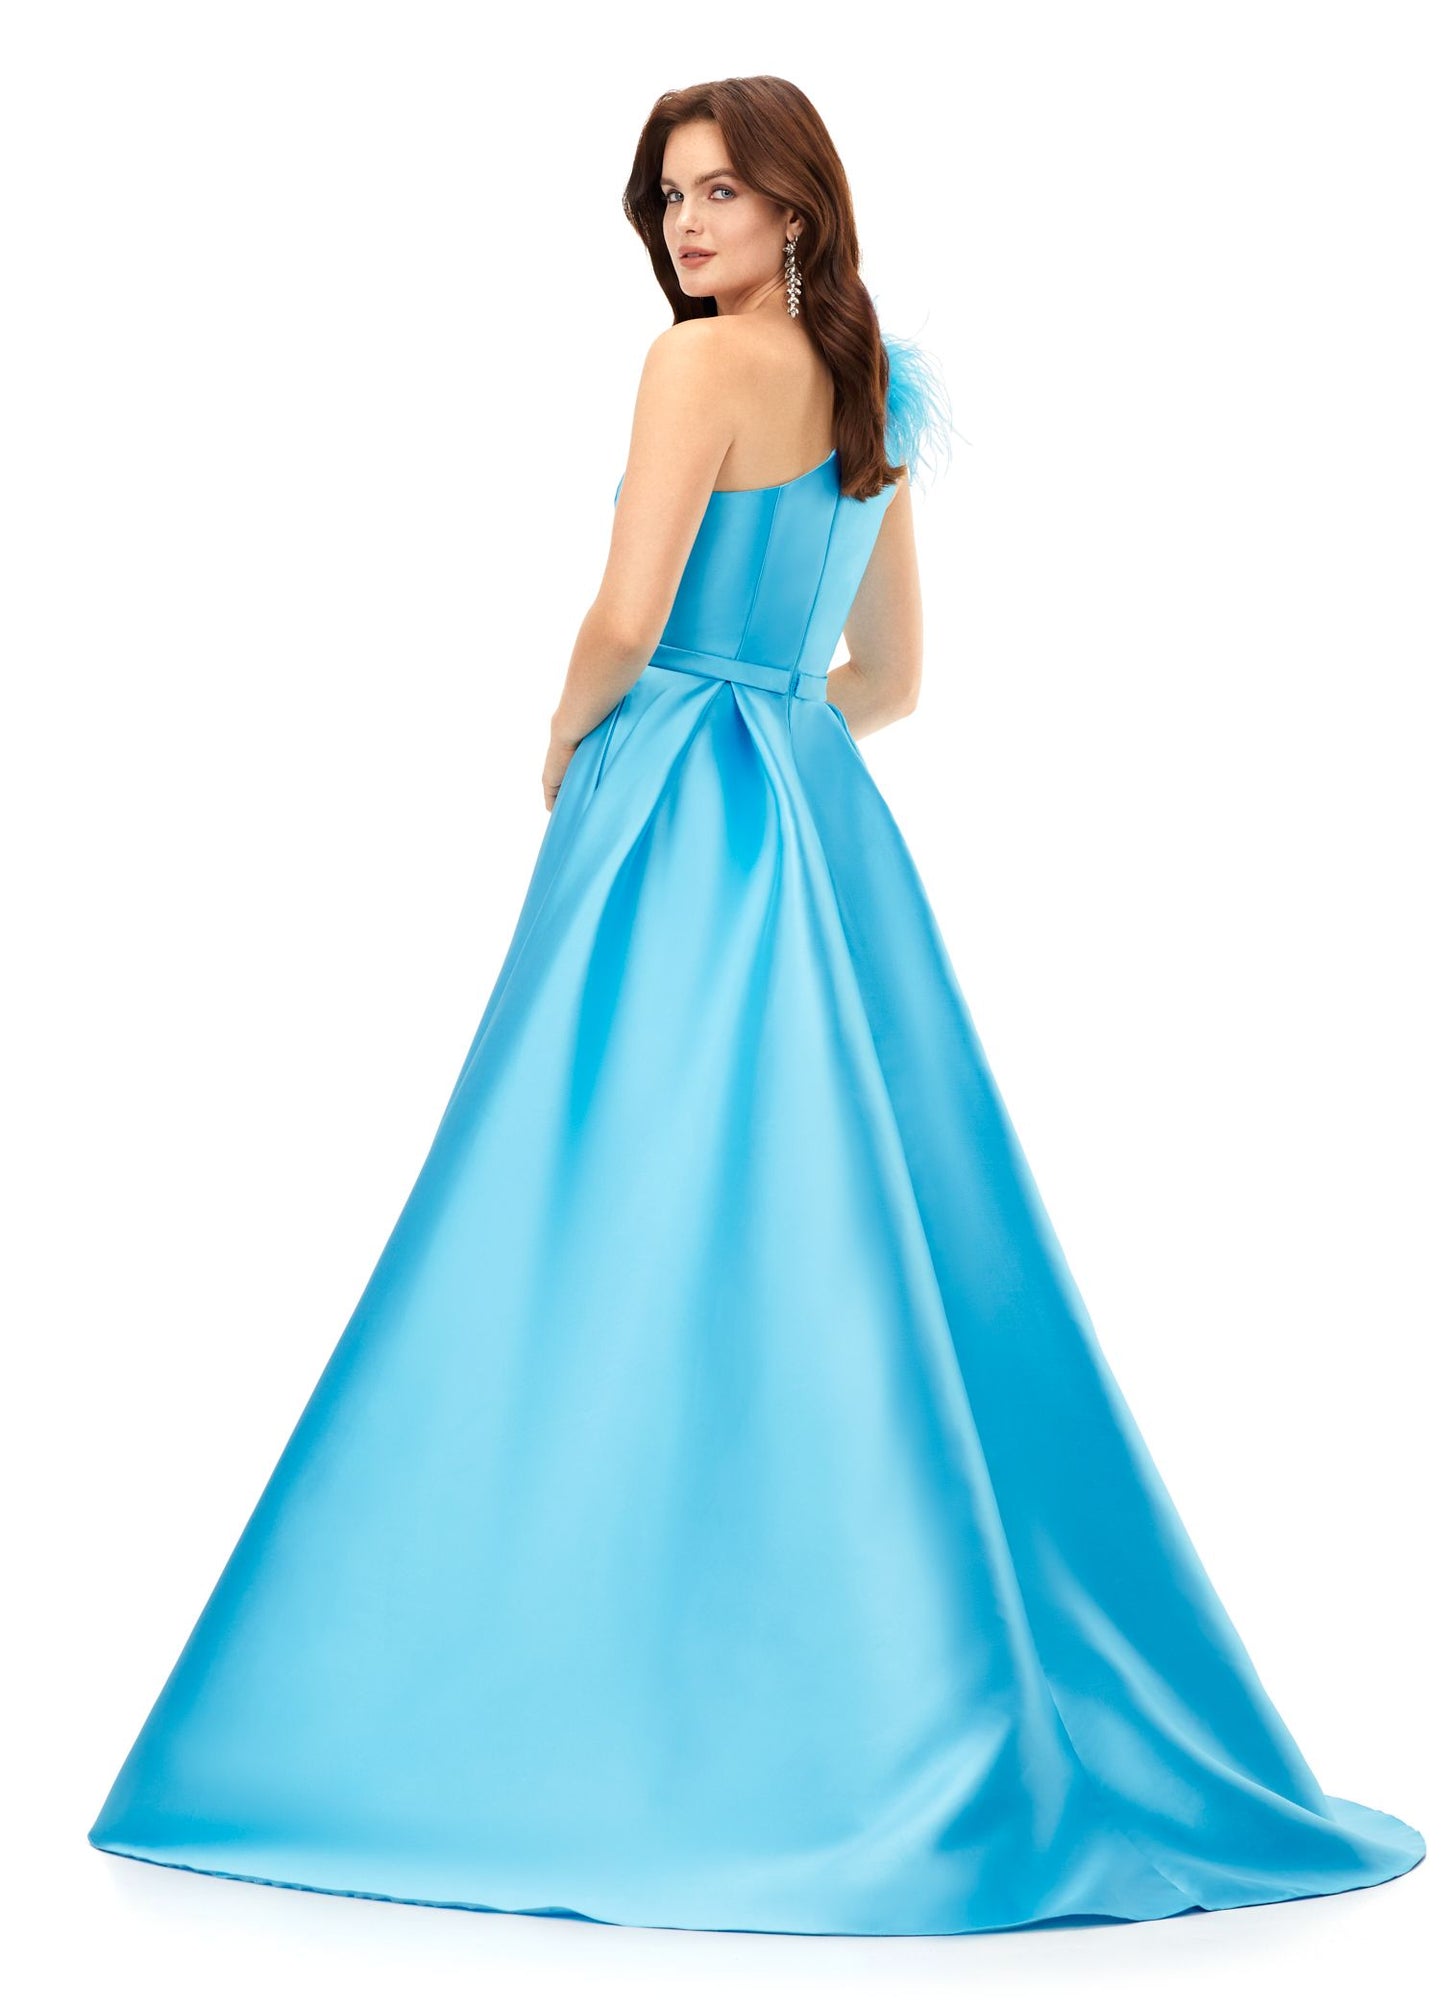 Ashley Lauren 11336 This elegant and sophiscated one shoulder ball gown is sure to make a statement at your next event. The neckline is emebellished with feather details. The a-line skirt completes the look. One Shoulder A-Line Skirt Feather Details Mikado COLORS: Turquoise, Ivory, Red